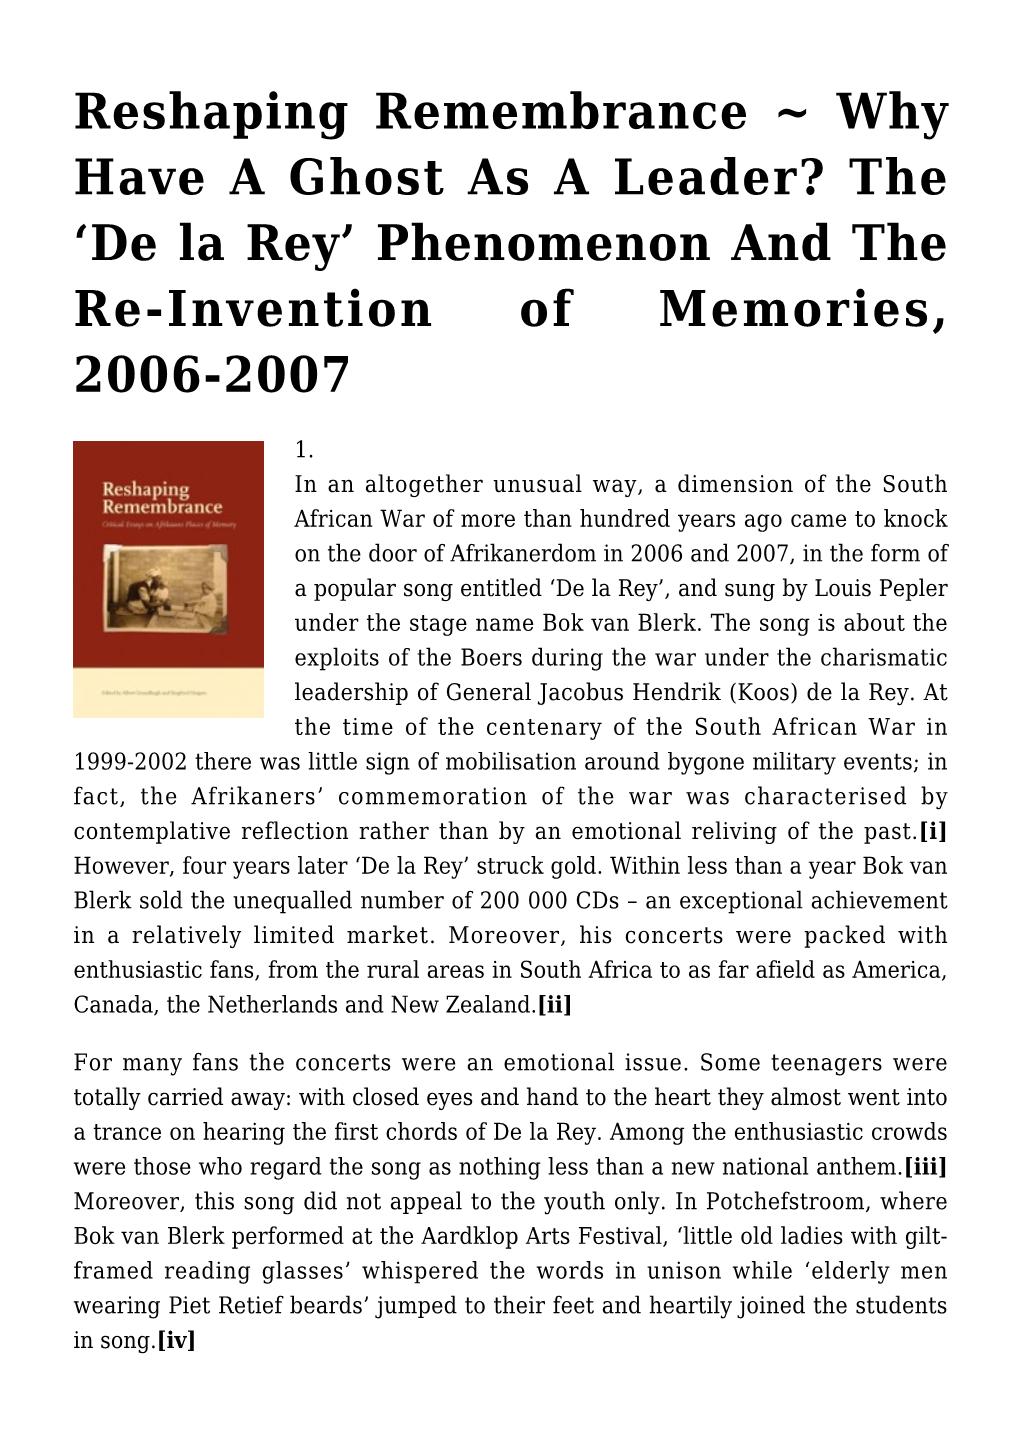 Reshaping Remembrance ~ Why Have a Ghost As a Leader? the ‘De La Rey’ Phenomenon and the Re-Invention of Memories, 2006-2007